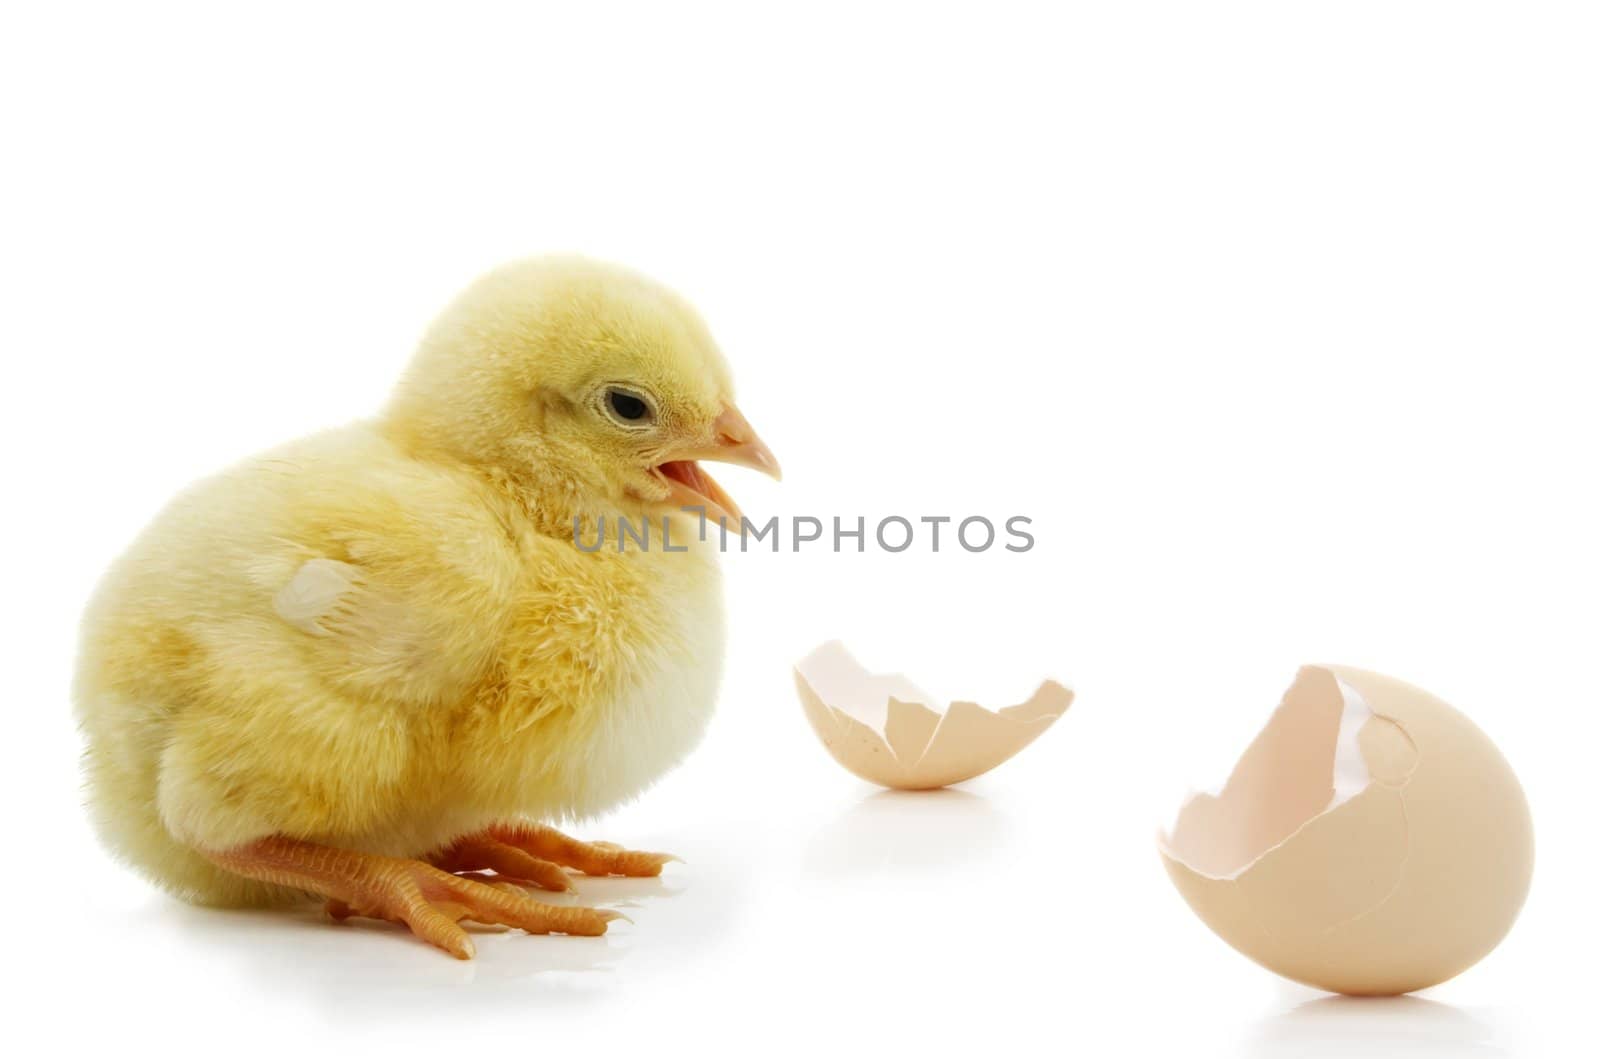 little yellow chick and egg shell isolated on white